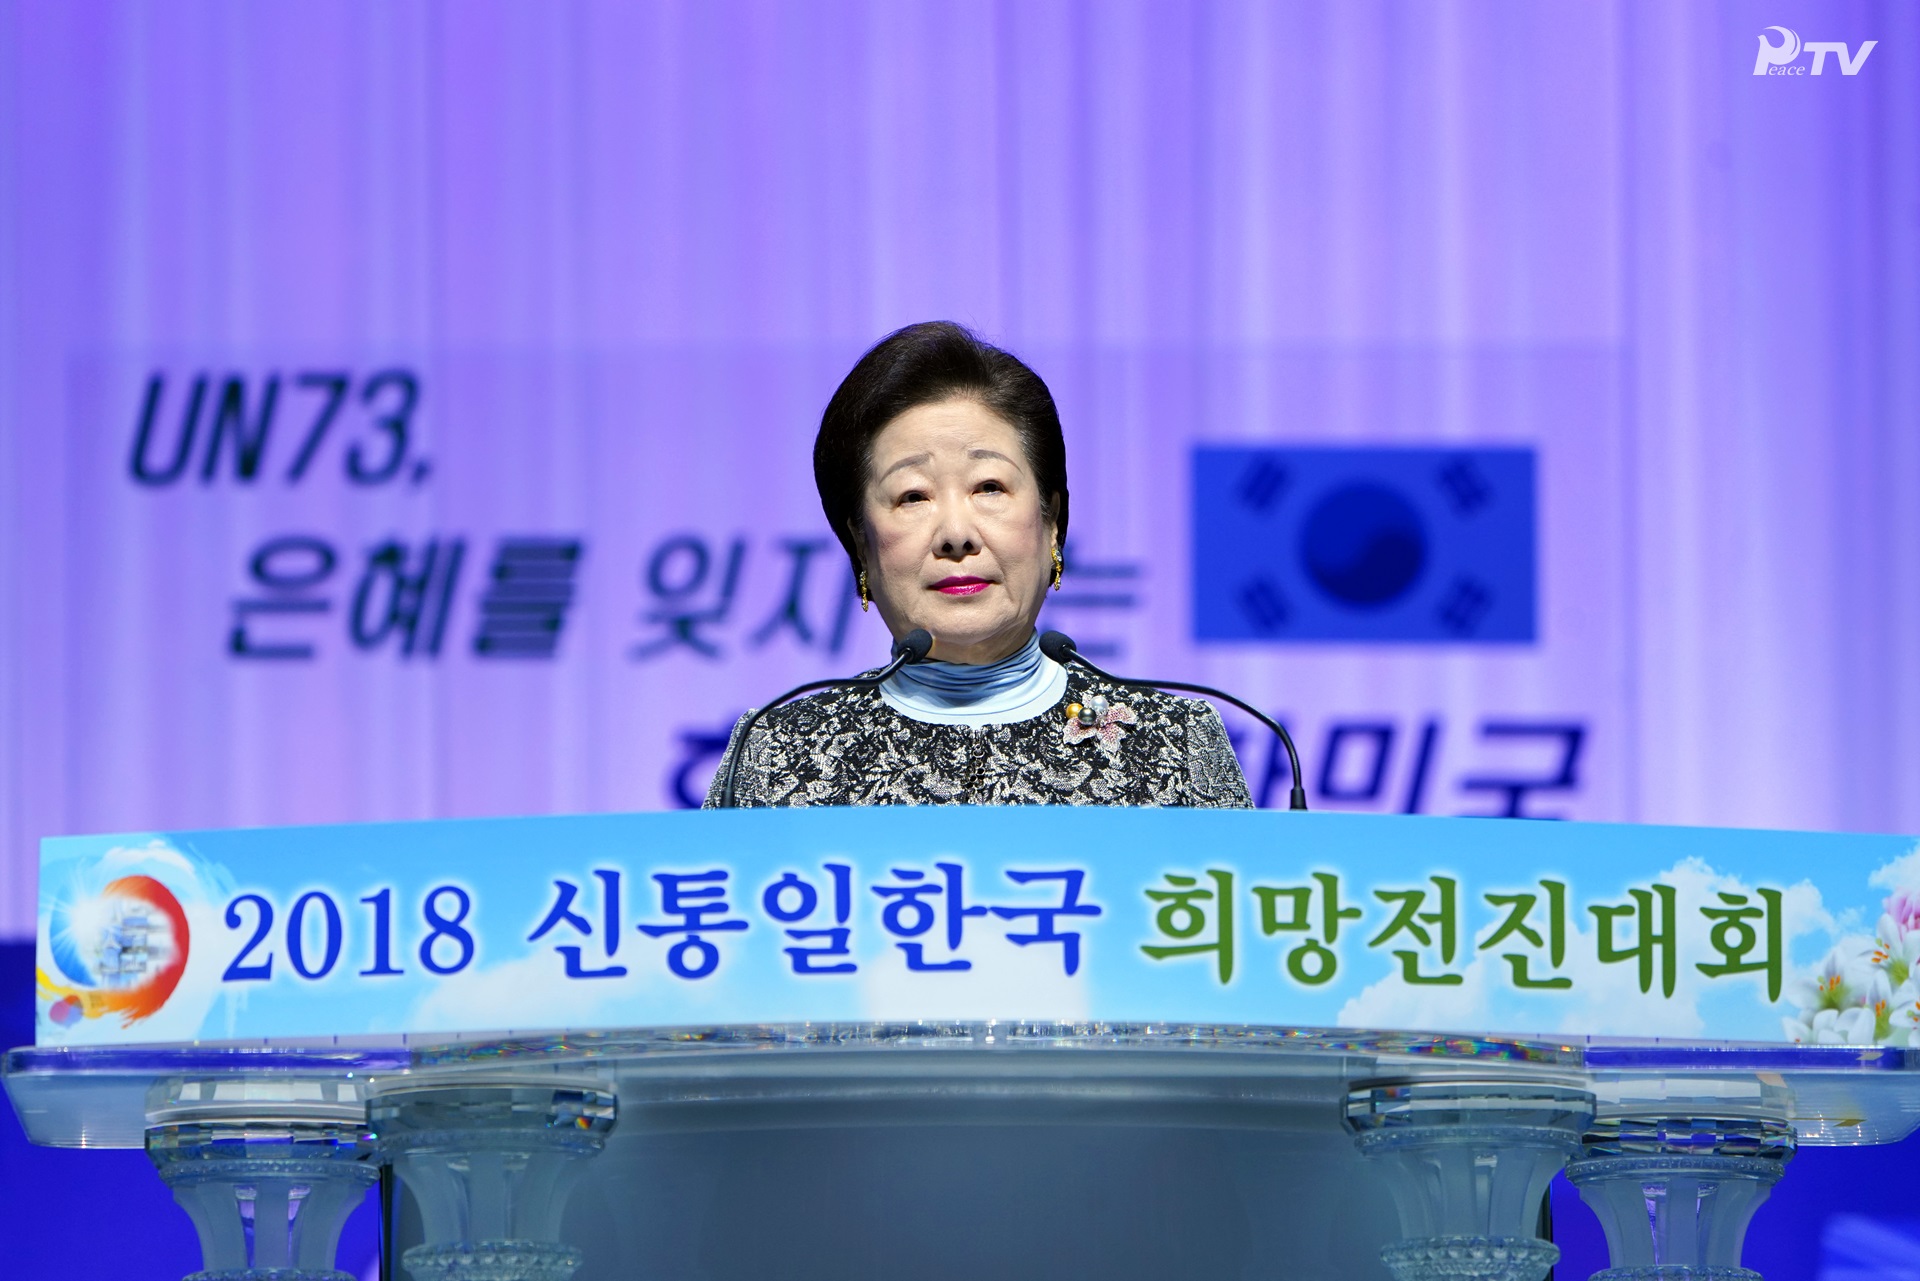 2018 Rally for the Hopeful March Forward of a Unified, Heavenly Korea (October 28, 2018)